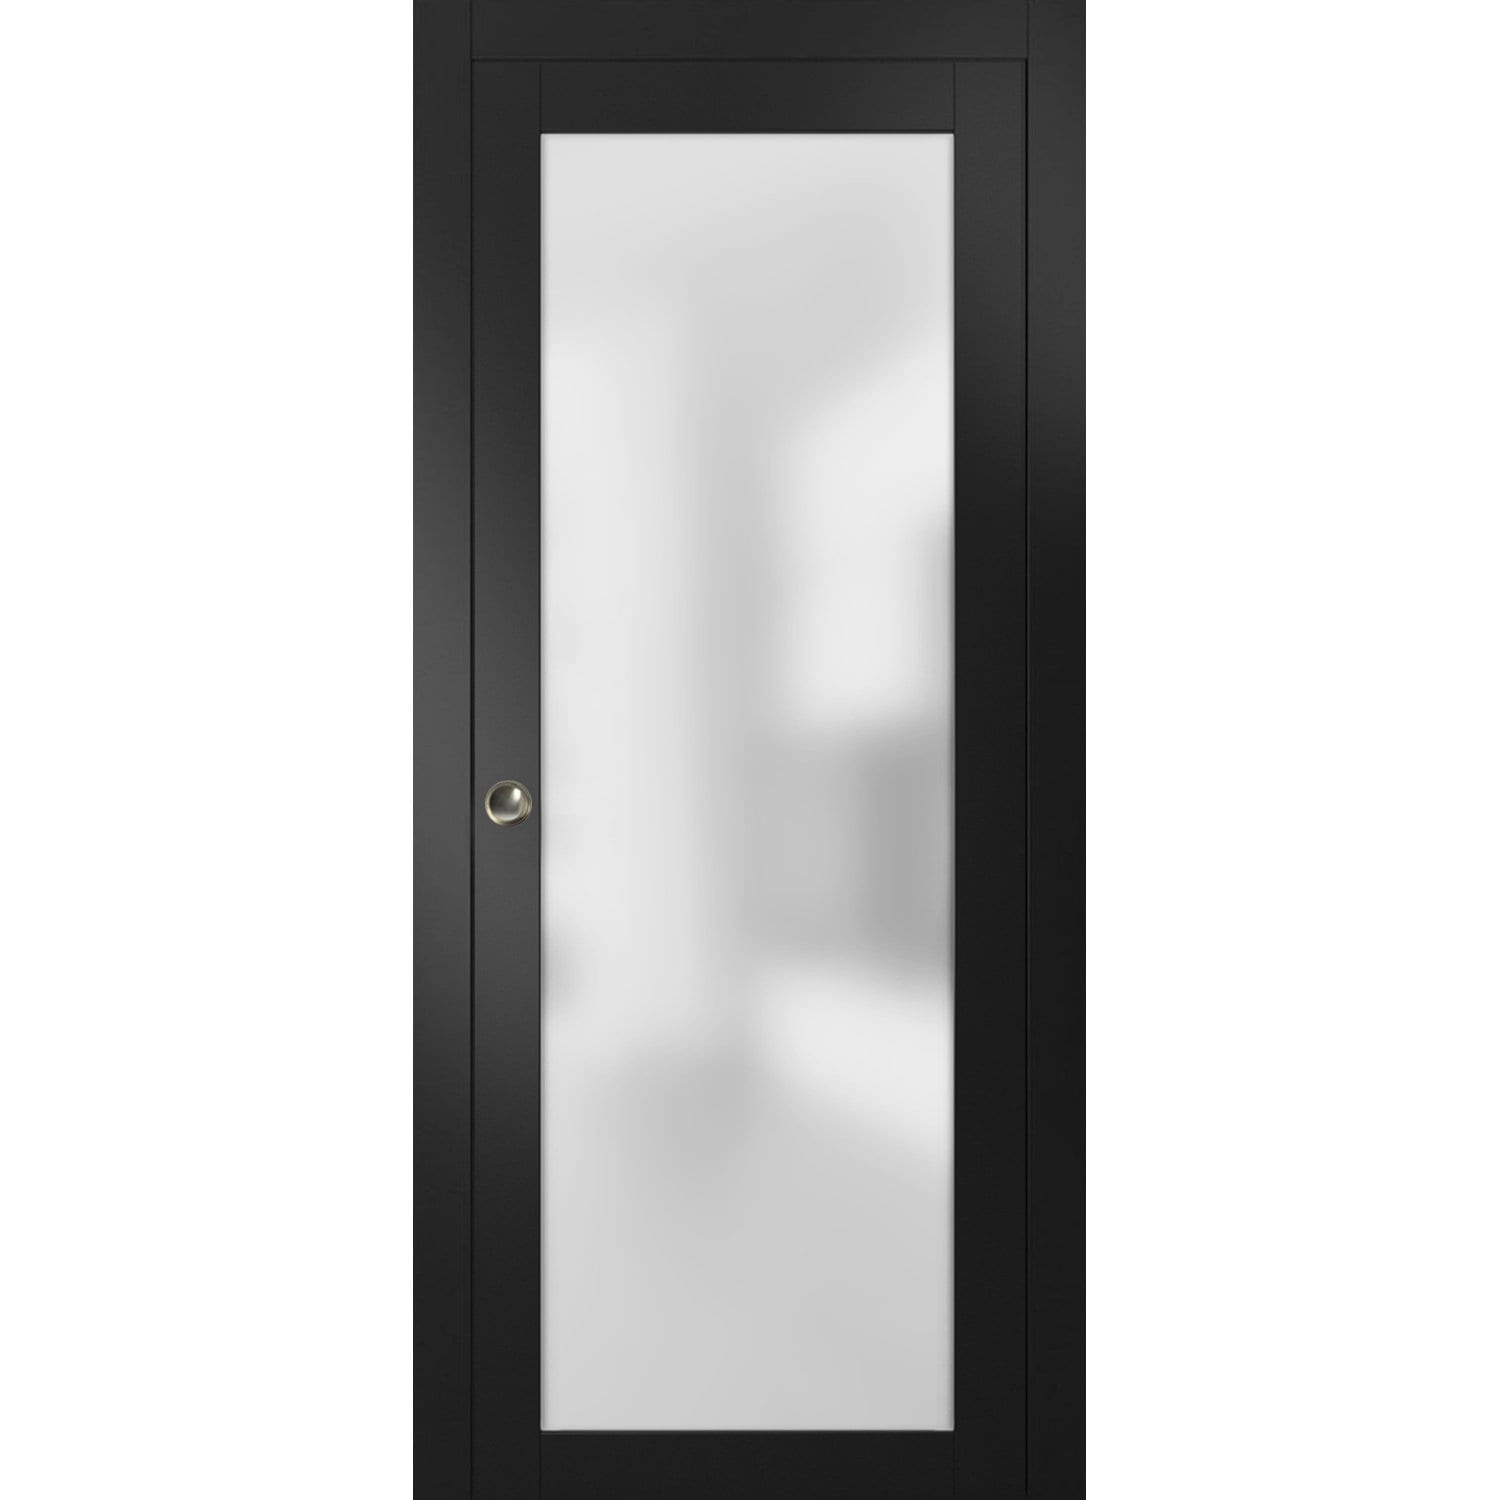 https://ak1.ostkcdn.com/images/products/is/images/direct/d5dee27b8ac5c6bf2b61f1ac8c0080fe2ee9a79c/Sliding-Pocket-Door-Frosted-Tempered-Glass---Planum-2102-Black-Matte.jpg